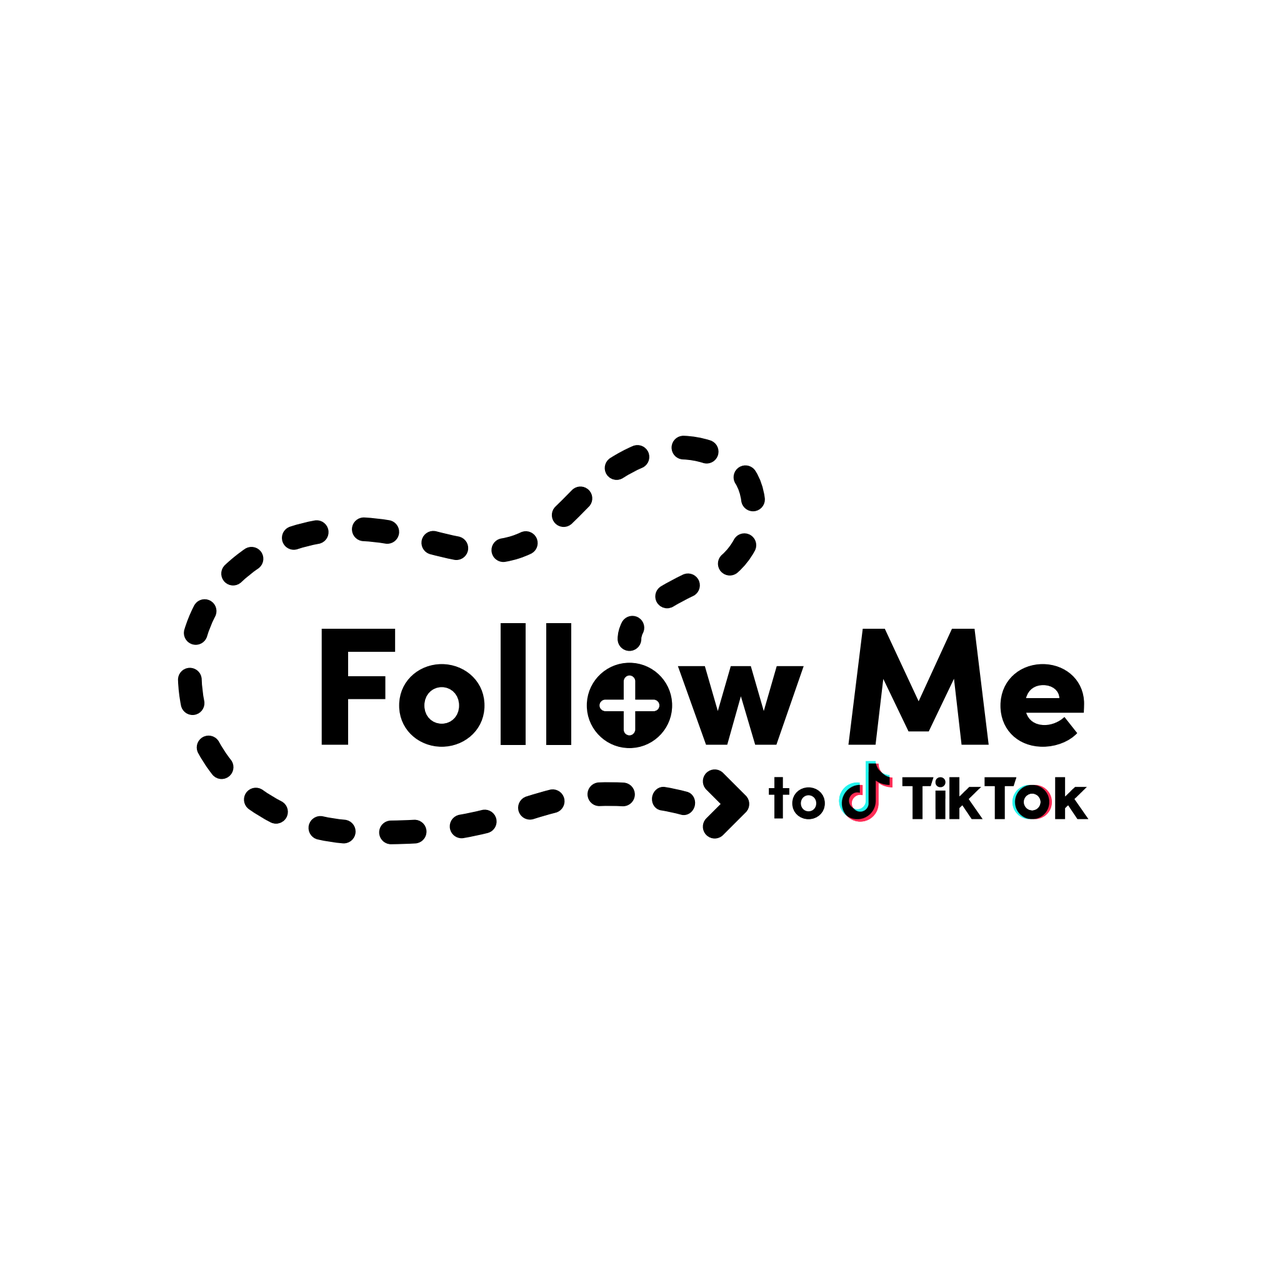 Introducing Follow Me to help small businesses build community and